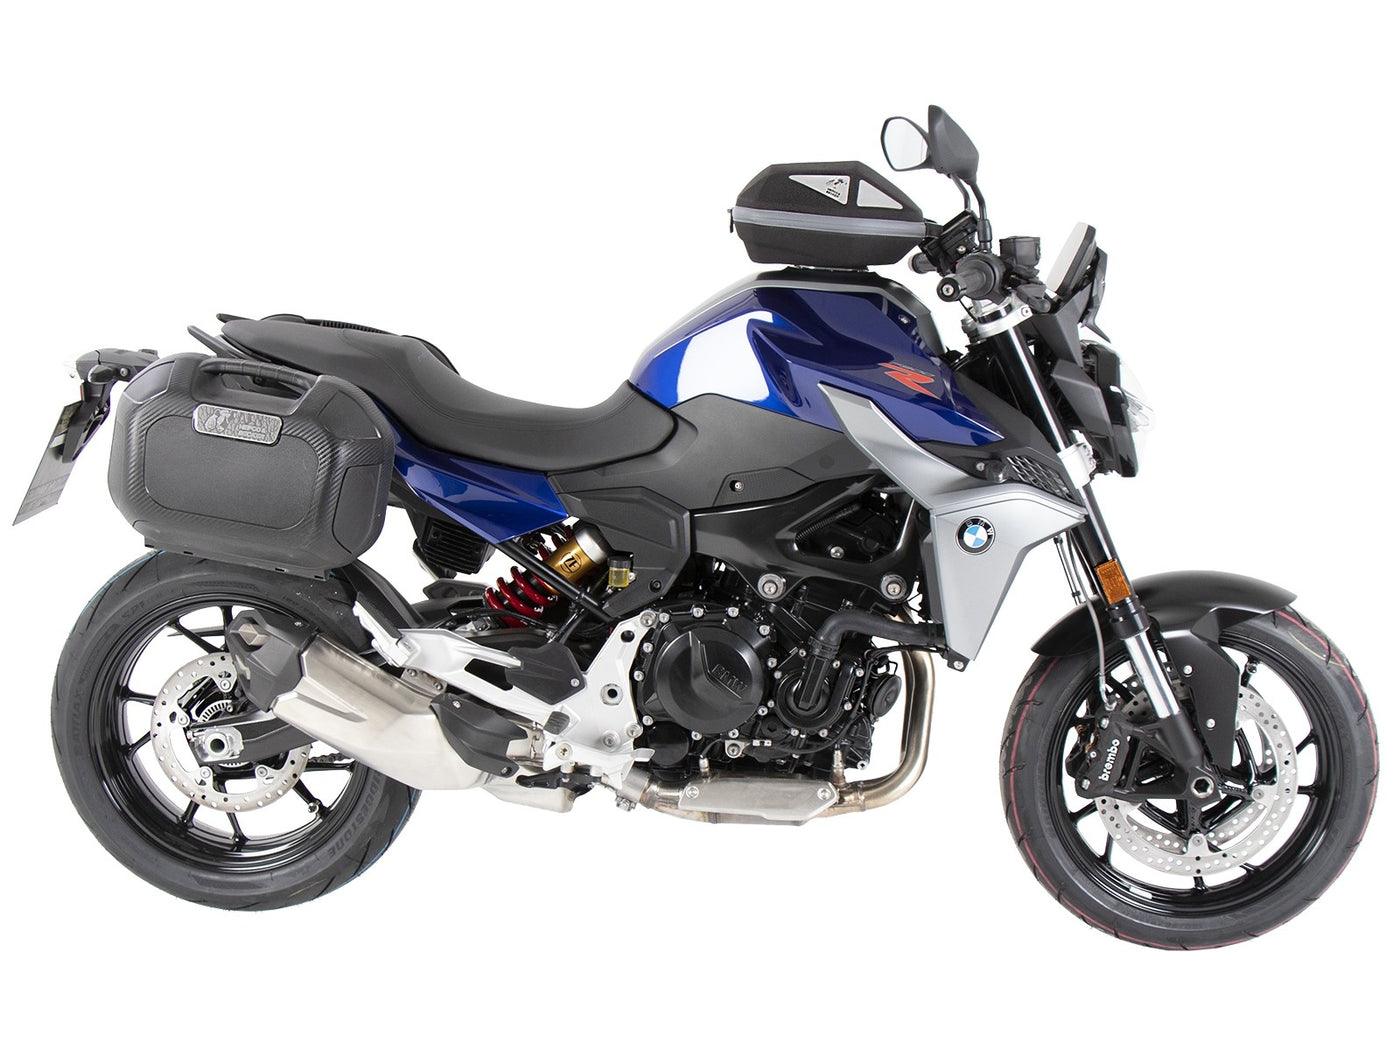 C-Bow SideCarrier for BMW F 900 XR / R (2020-)